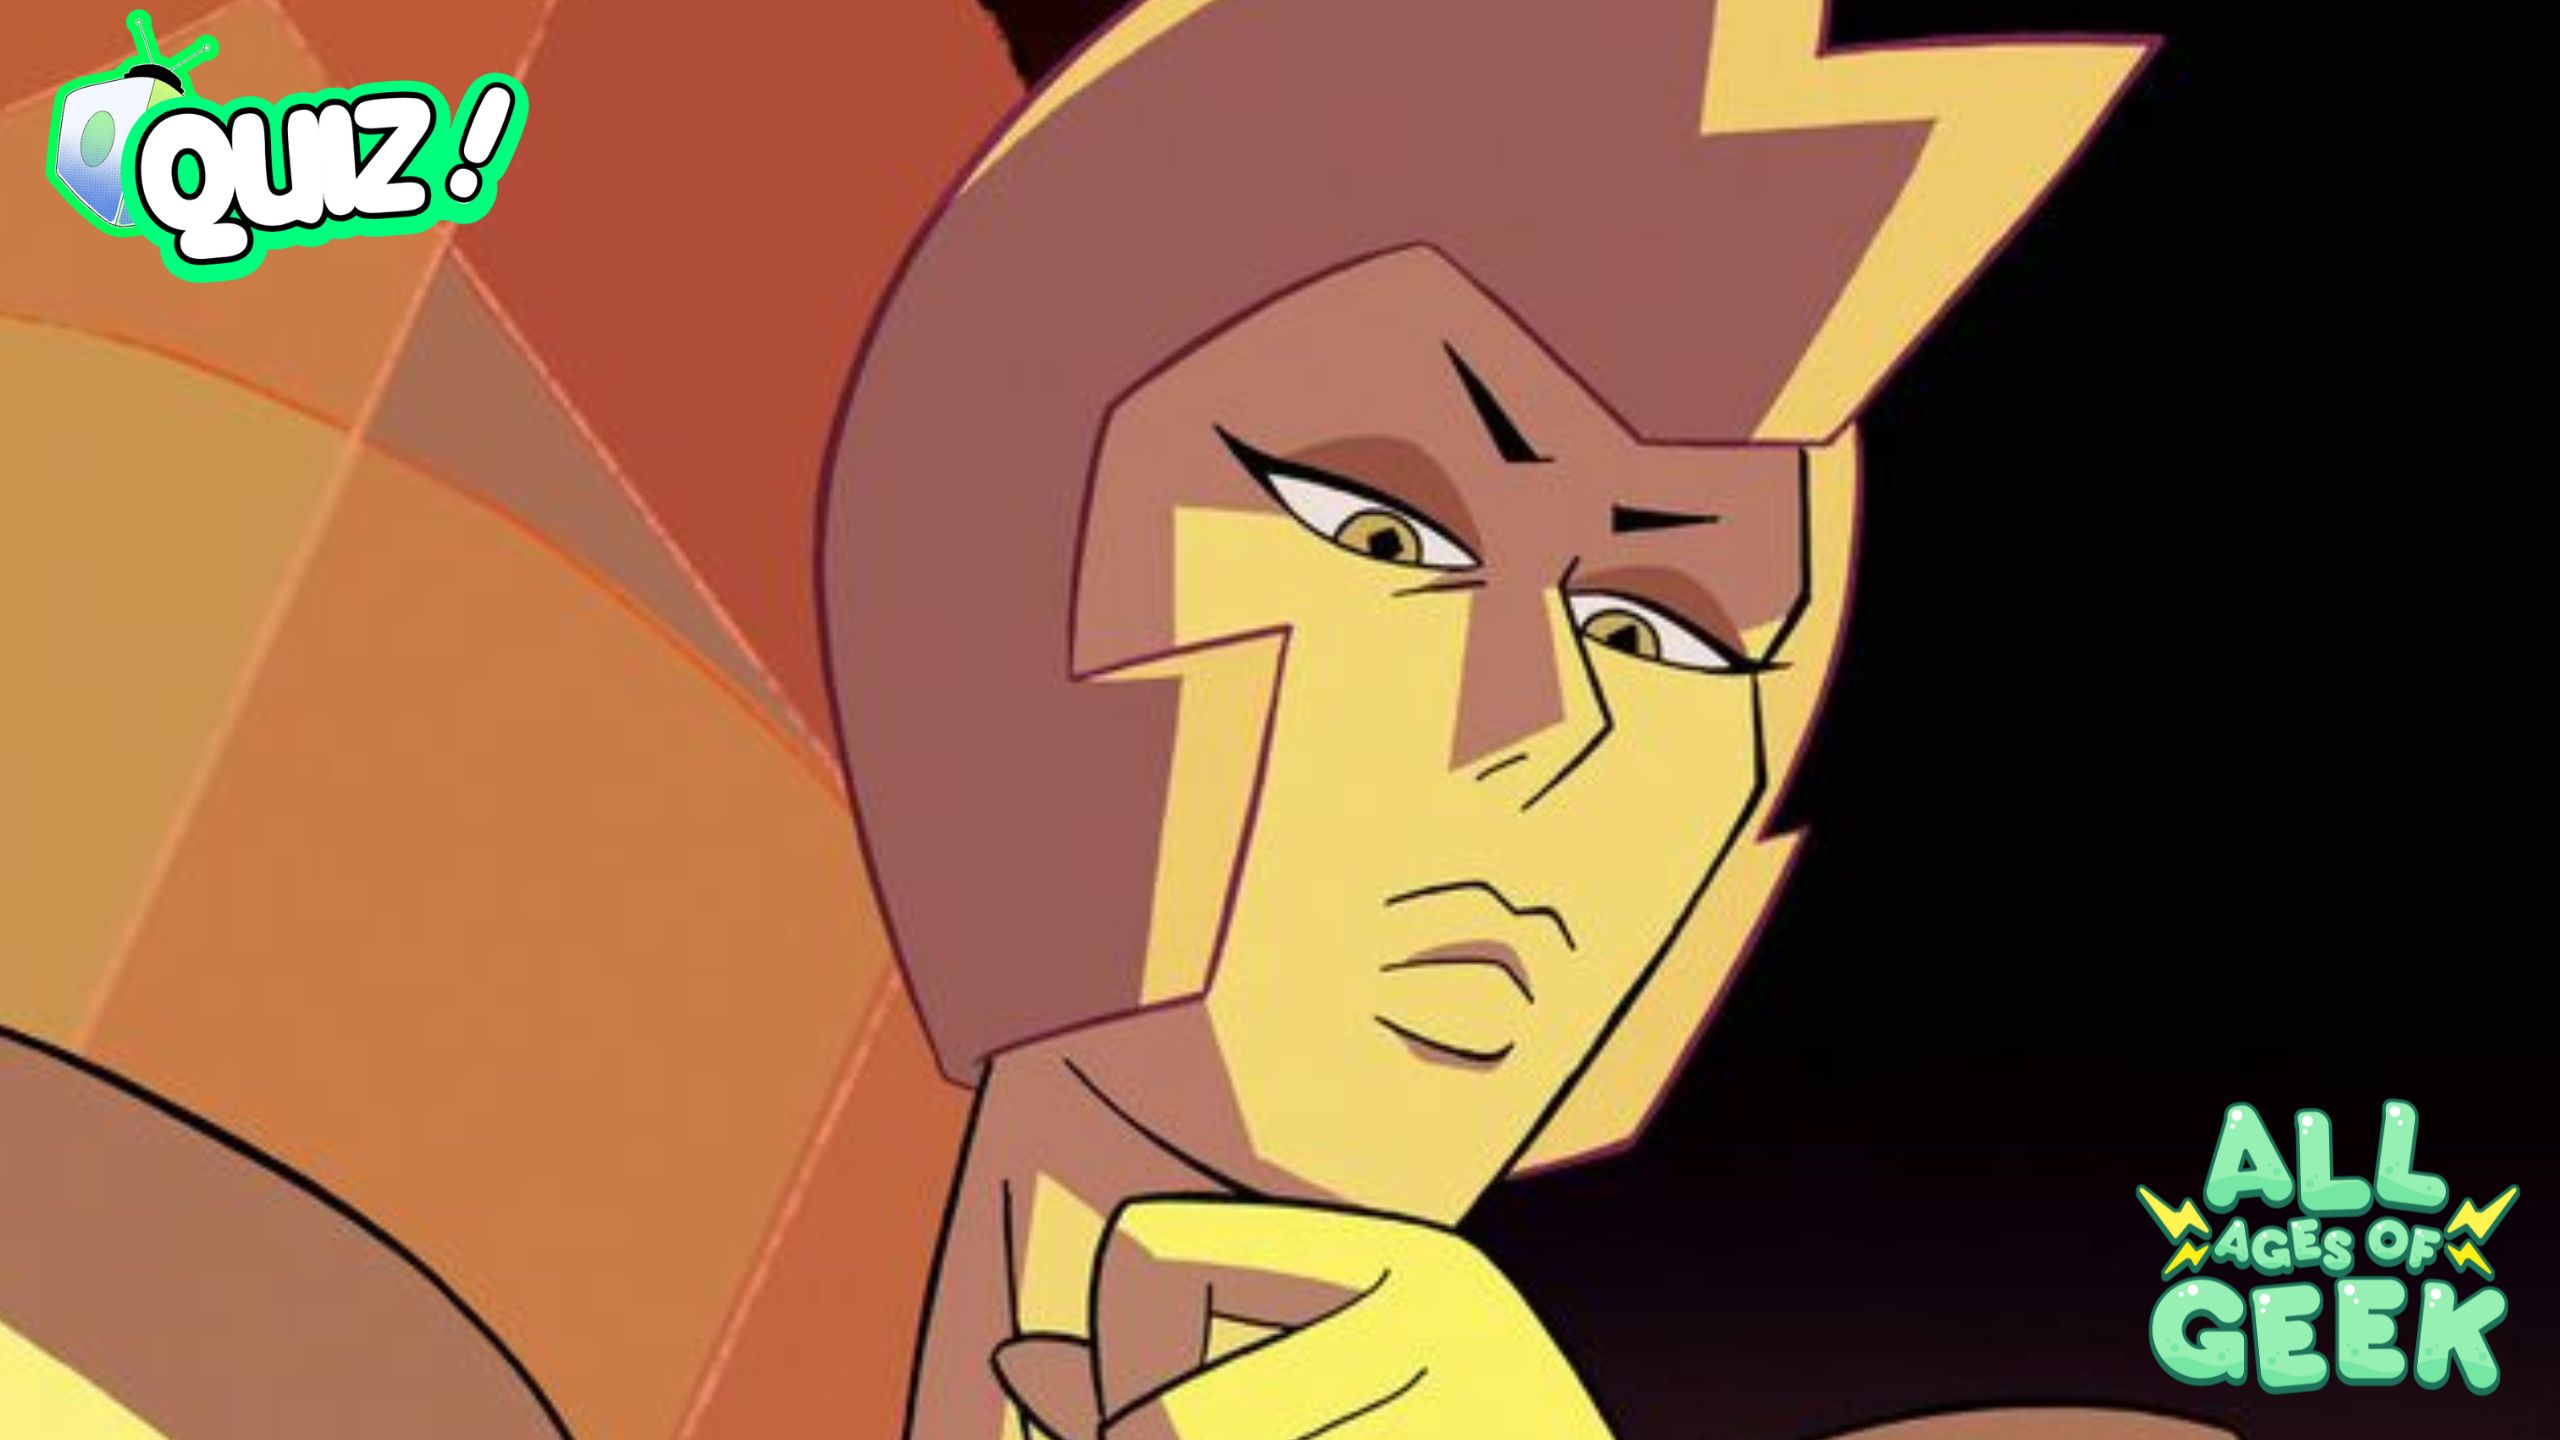 "A close-up of Yellow Diamond, a character from Steven Universe, showing her stern expression. This image is featured on All Ages of Geek and includes their logo."